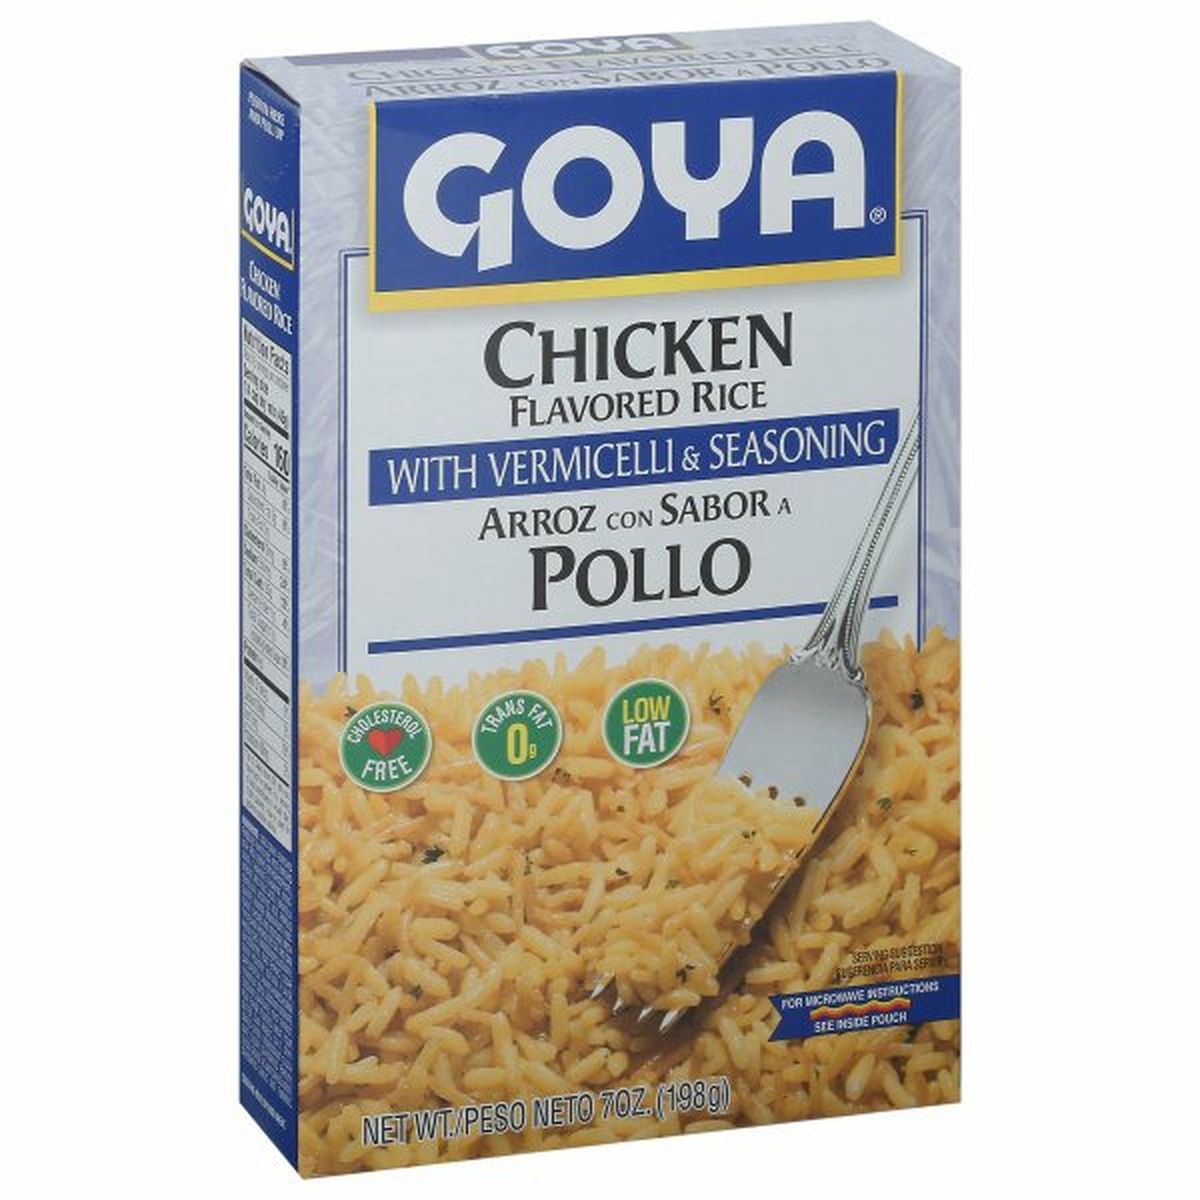 Calories in Goya Rice with Vermicelli & Seasoning, Chicken Flavored